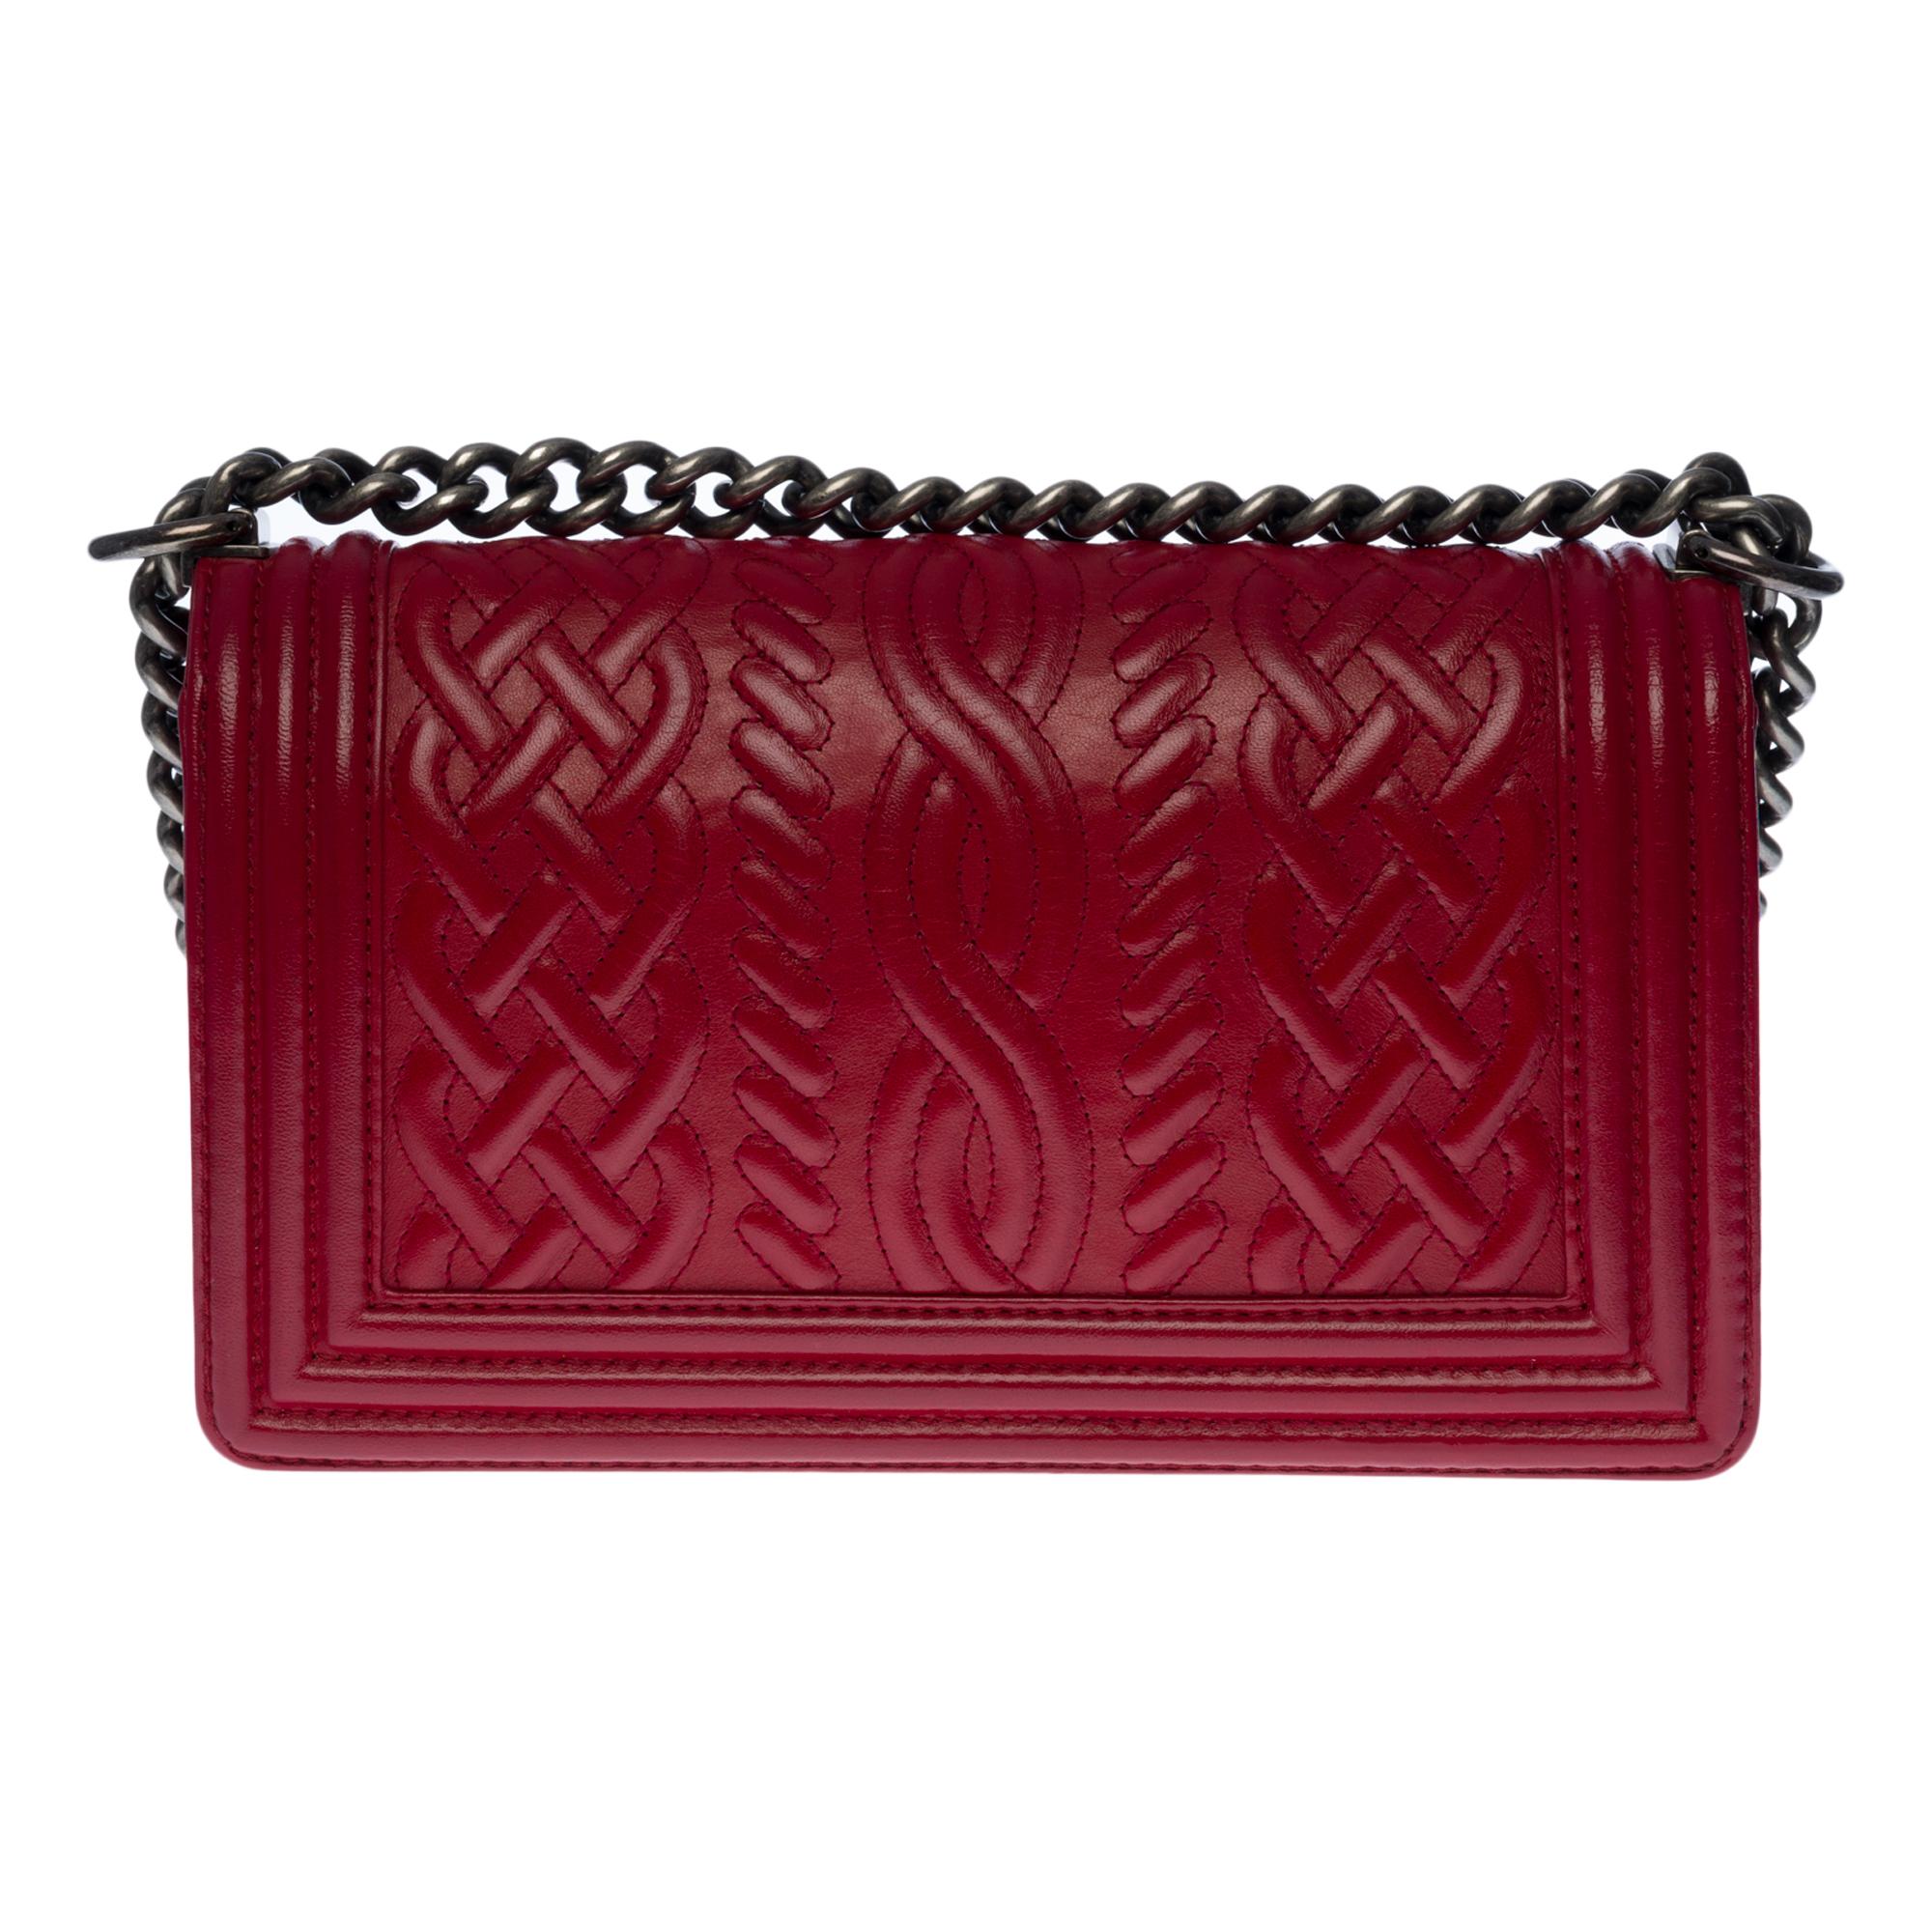 The iconic  Chanel Boy old medium limited edition shoulder bag in red embossed leather, trimmed in ruthenium metal, an adjustable ruthenium metal chain handle allowing a shoulder or shoulder strap.

A ruthenium metal logo closure on the flap.
Lining